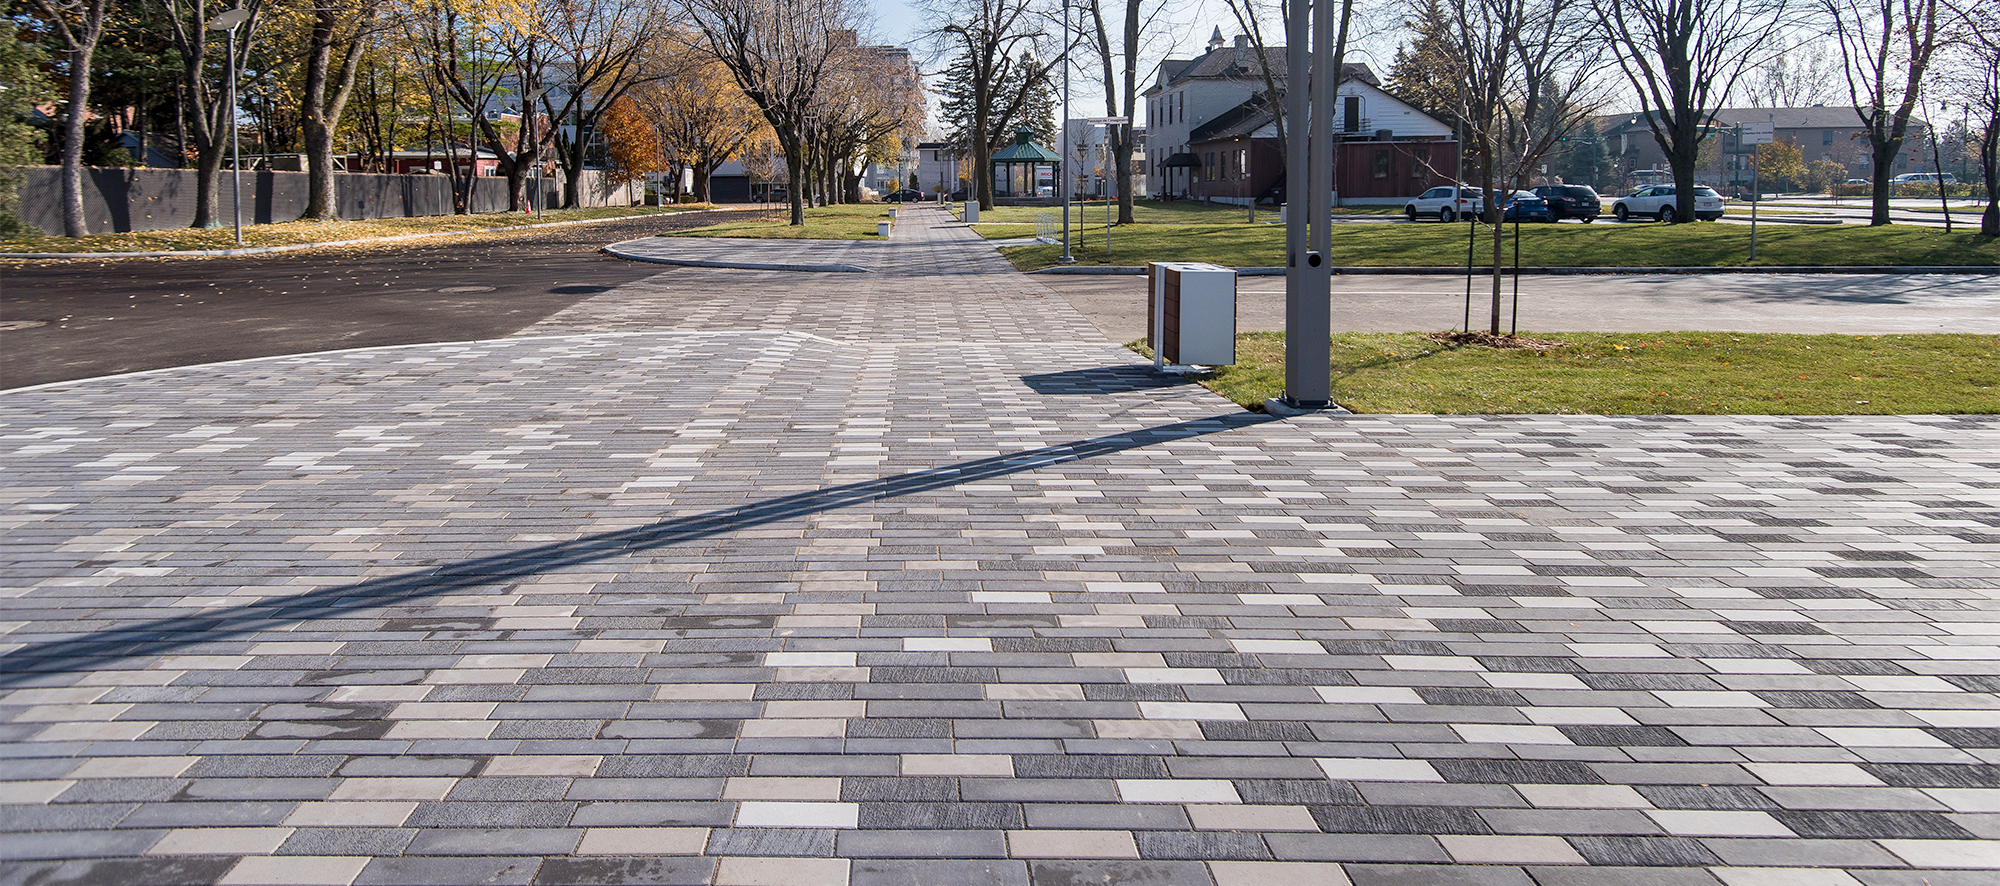 Tri-colored Il Campo pavers stretch the length of the street, bordered by grass and trees, and the road.